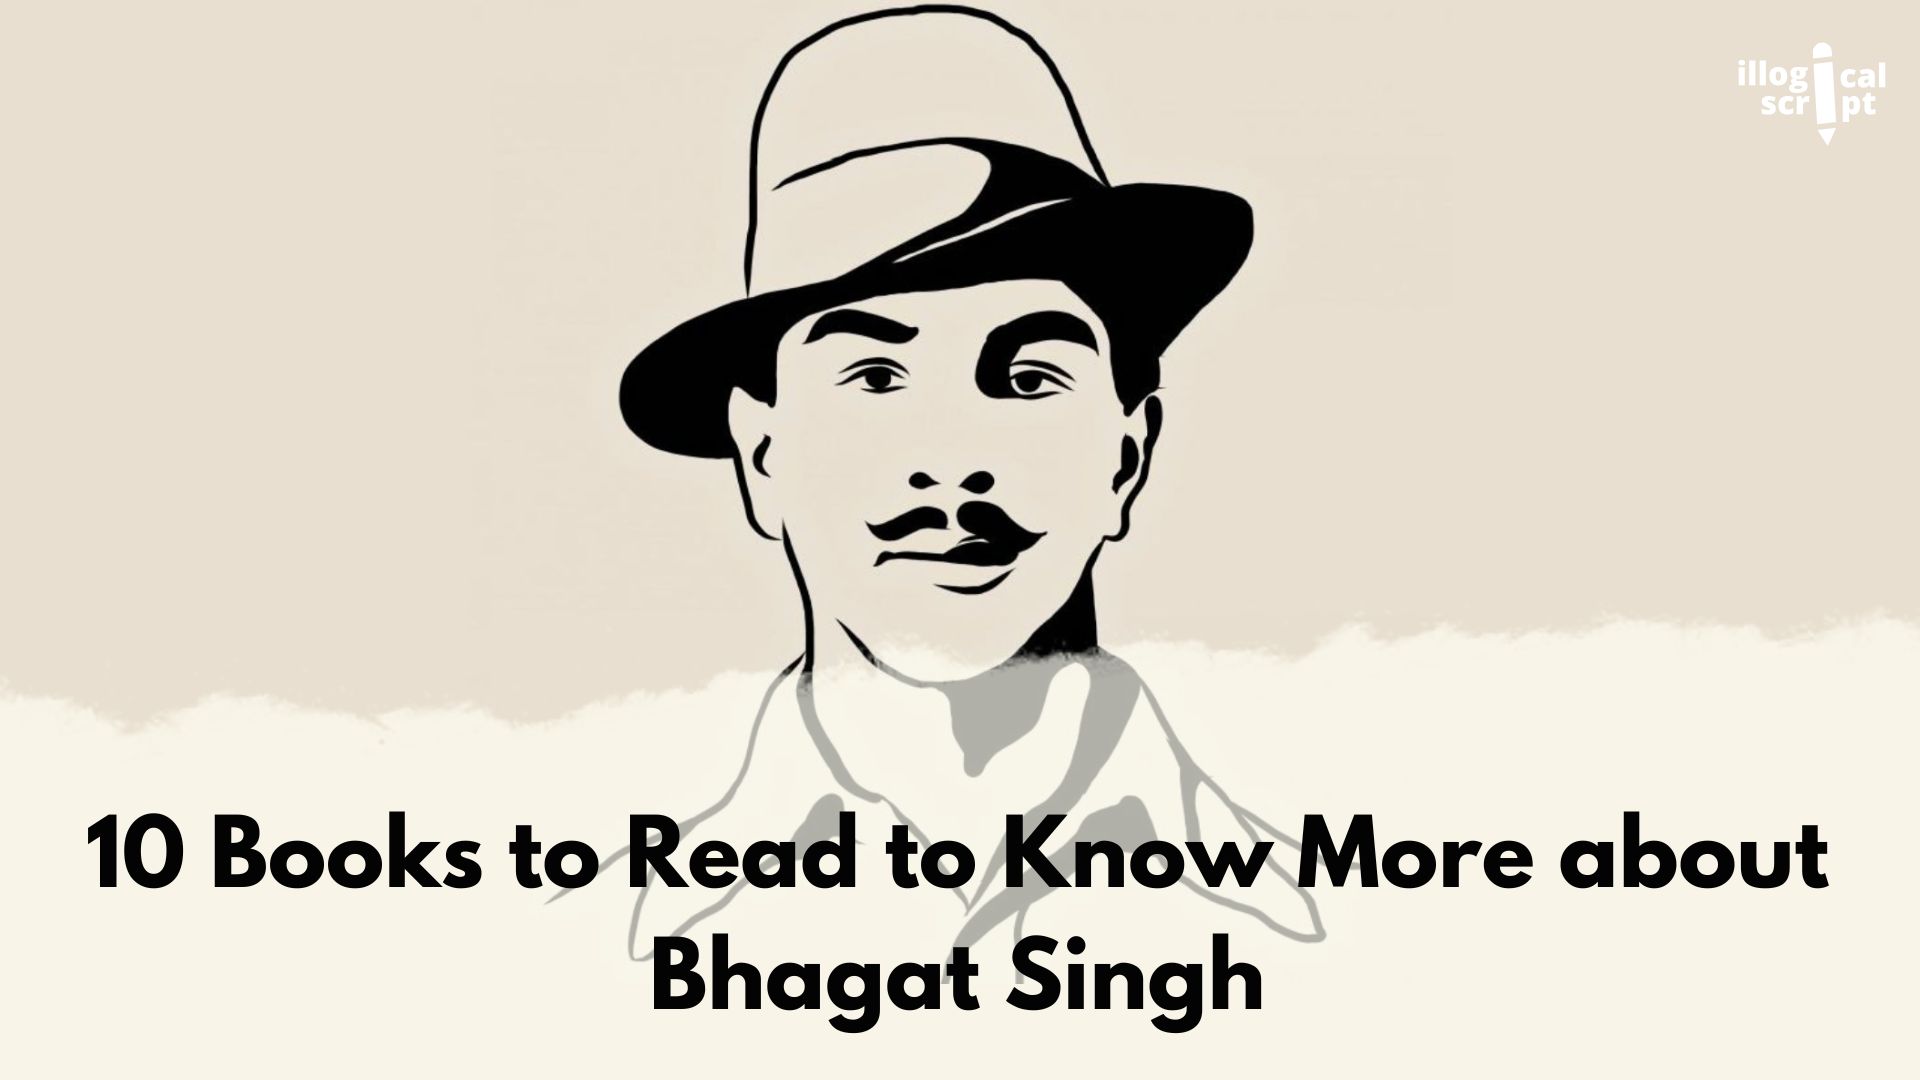 10 Books to Read to Know More about Bhagat Singh